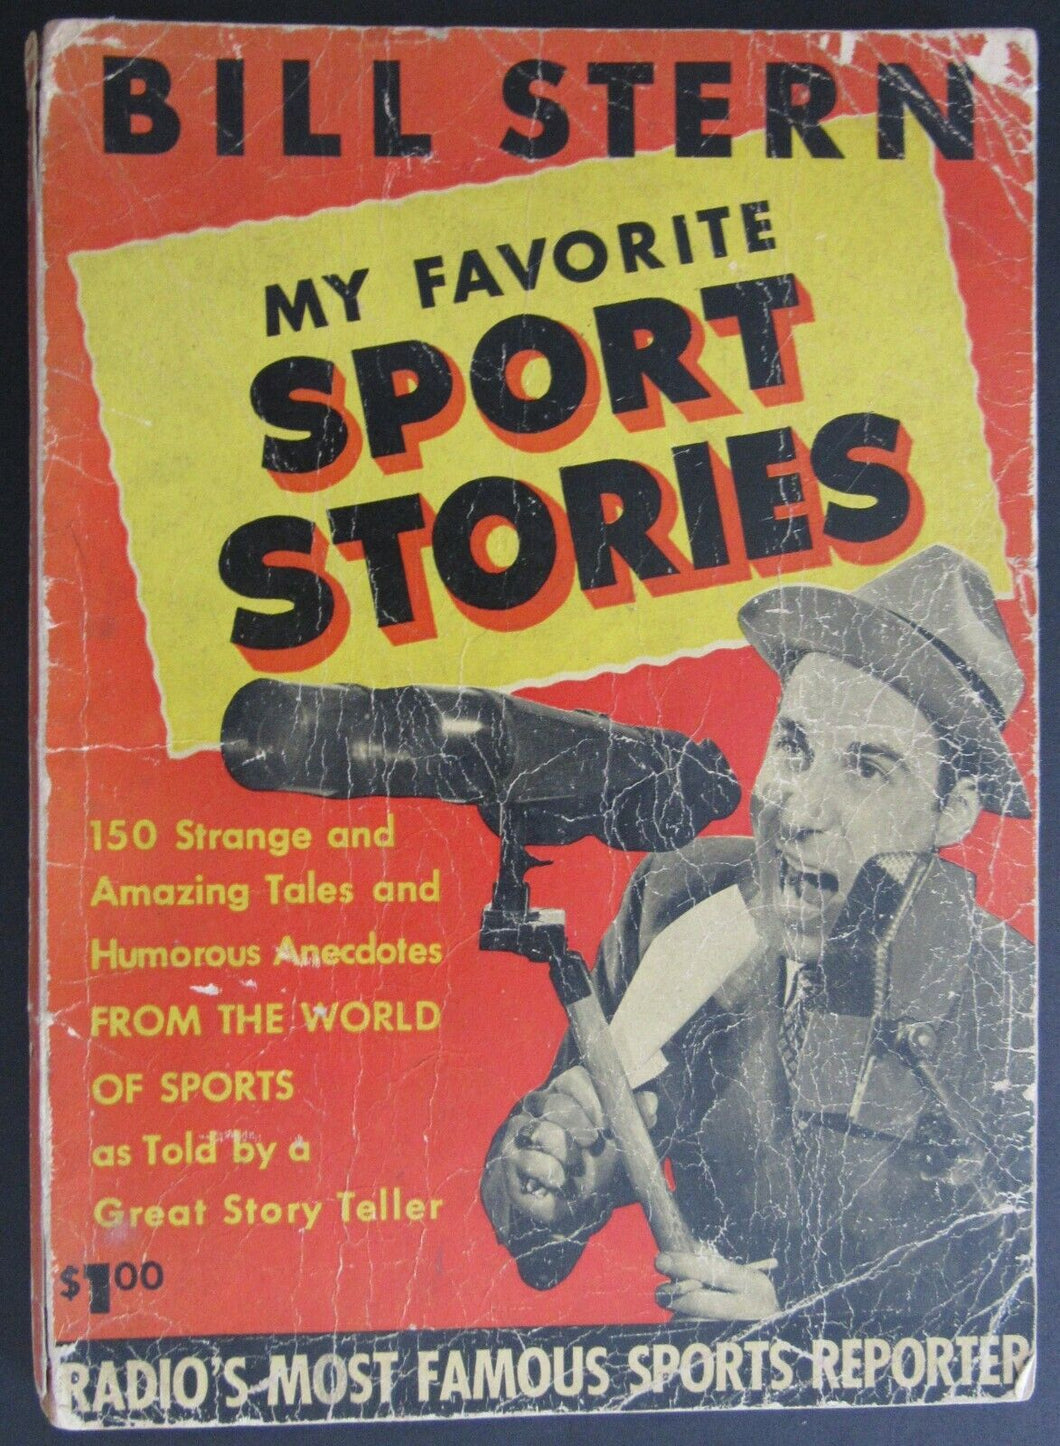 1946 Sports Reporter Bill Stern's My Favorite Sport Stories Softcover Book